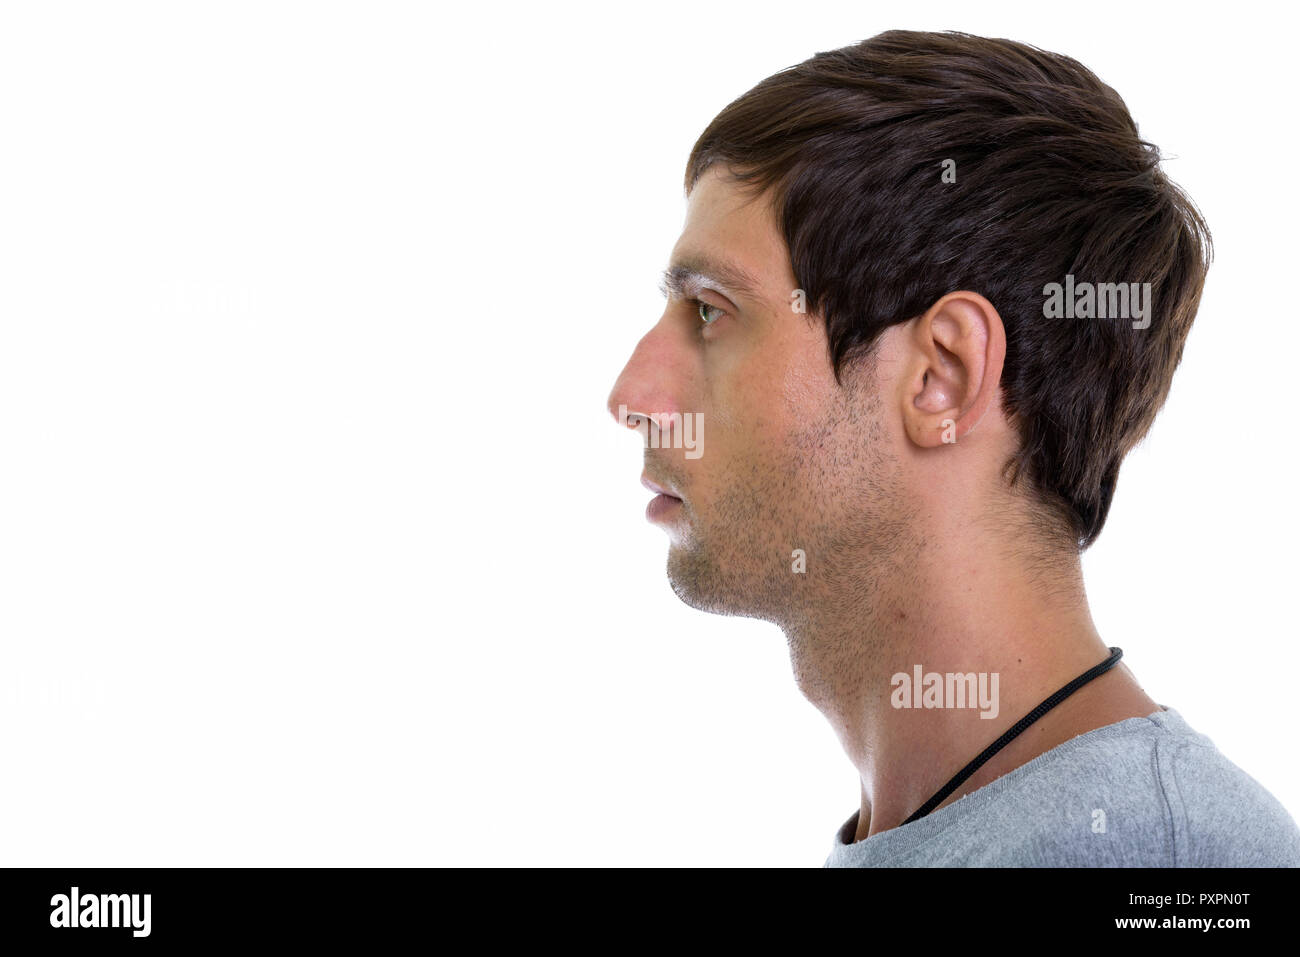 Close up profile view of young handsome man Stock Photo